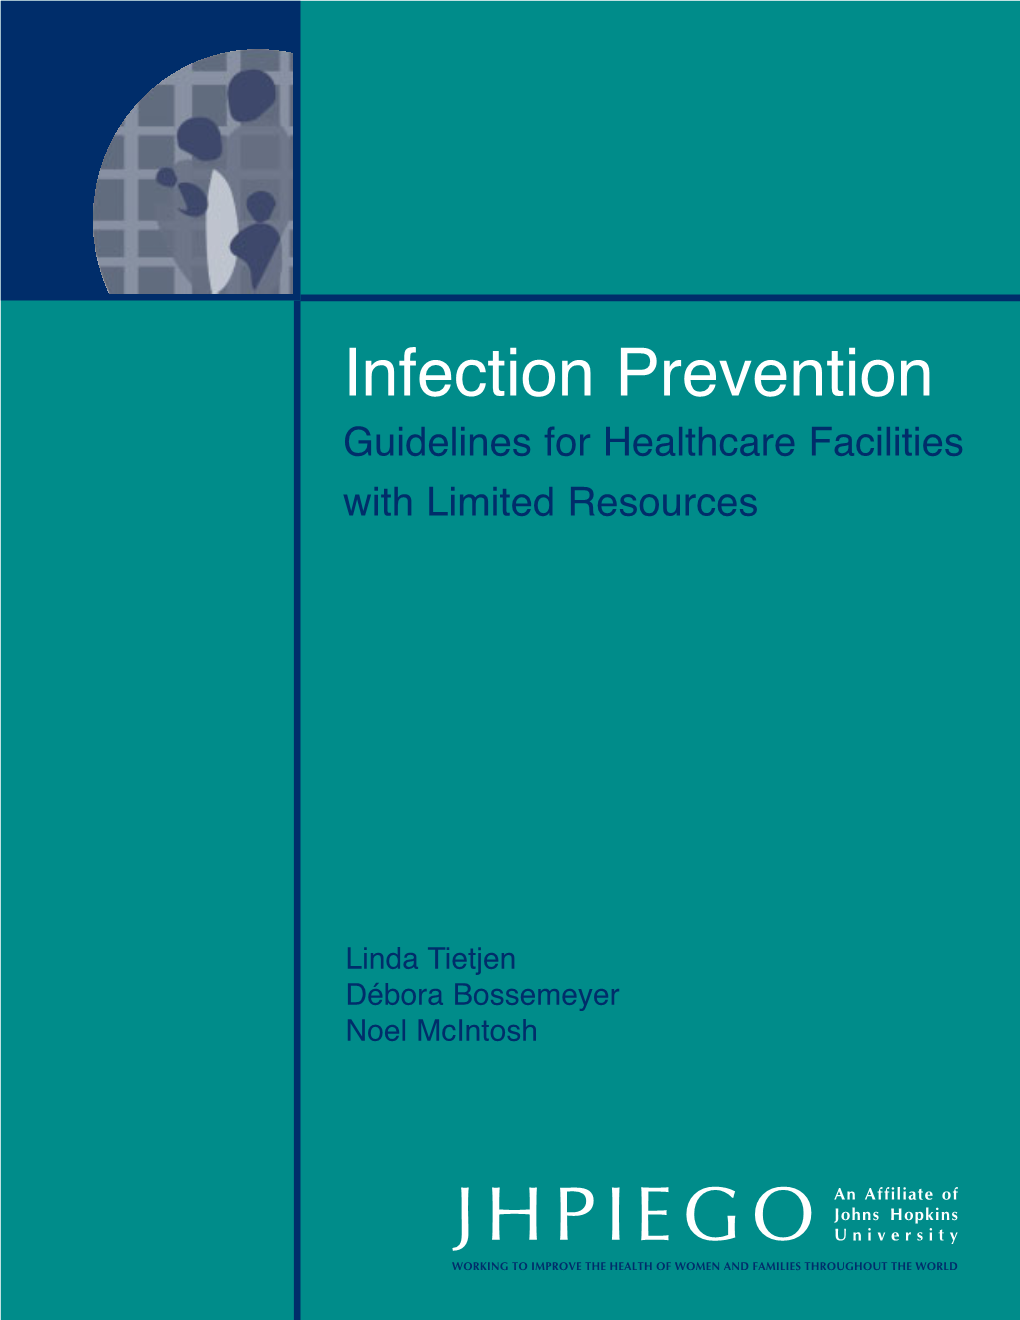 Infection Prevention Guidelines for Healthcare Facilities with Limited Resources